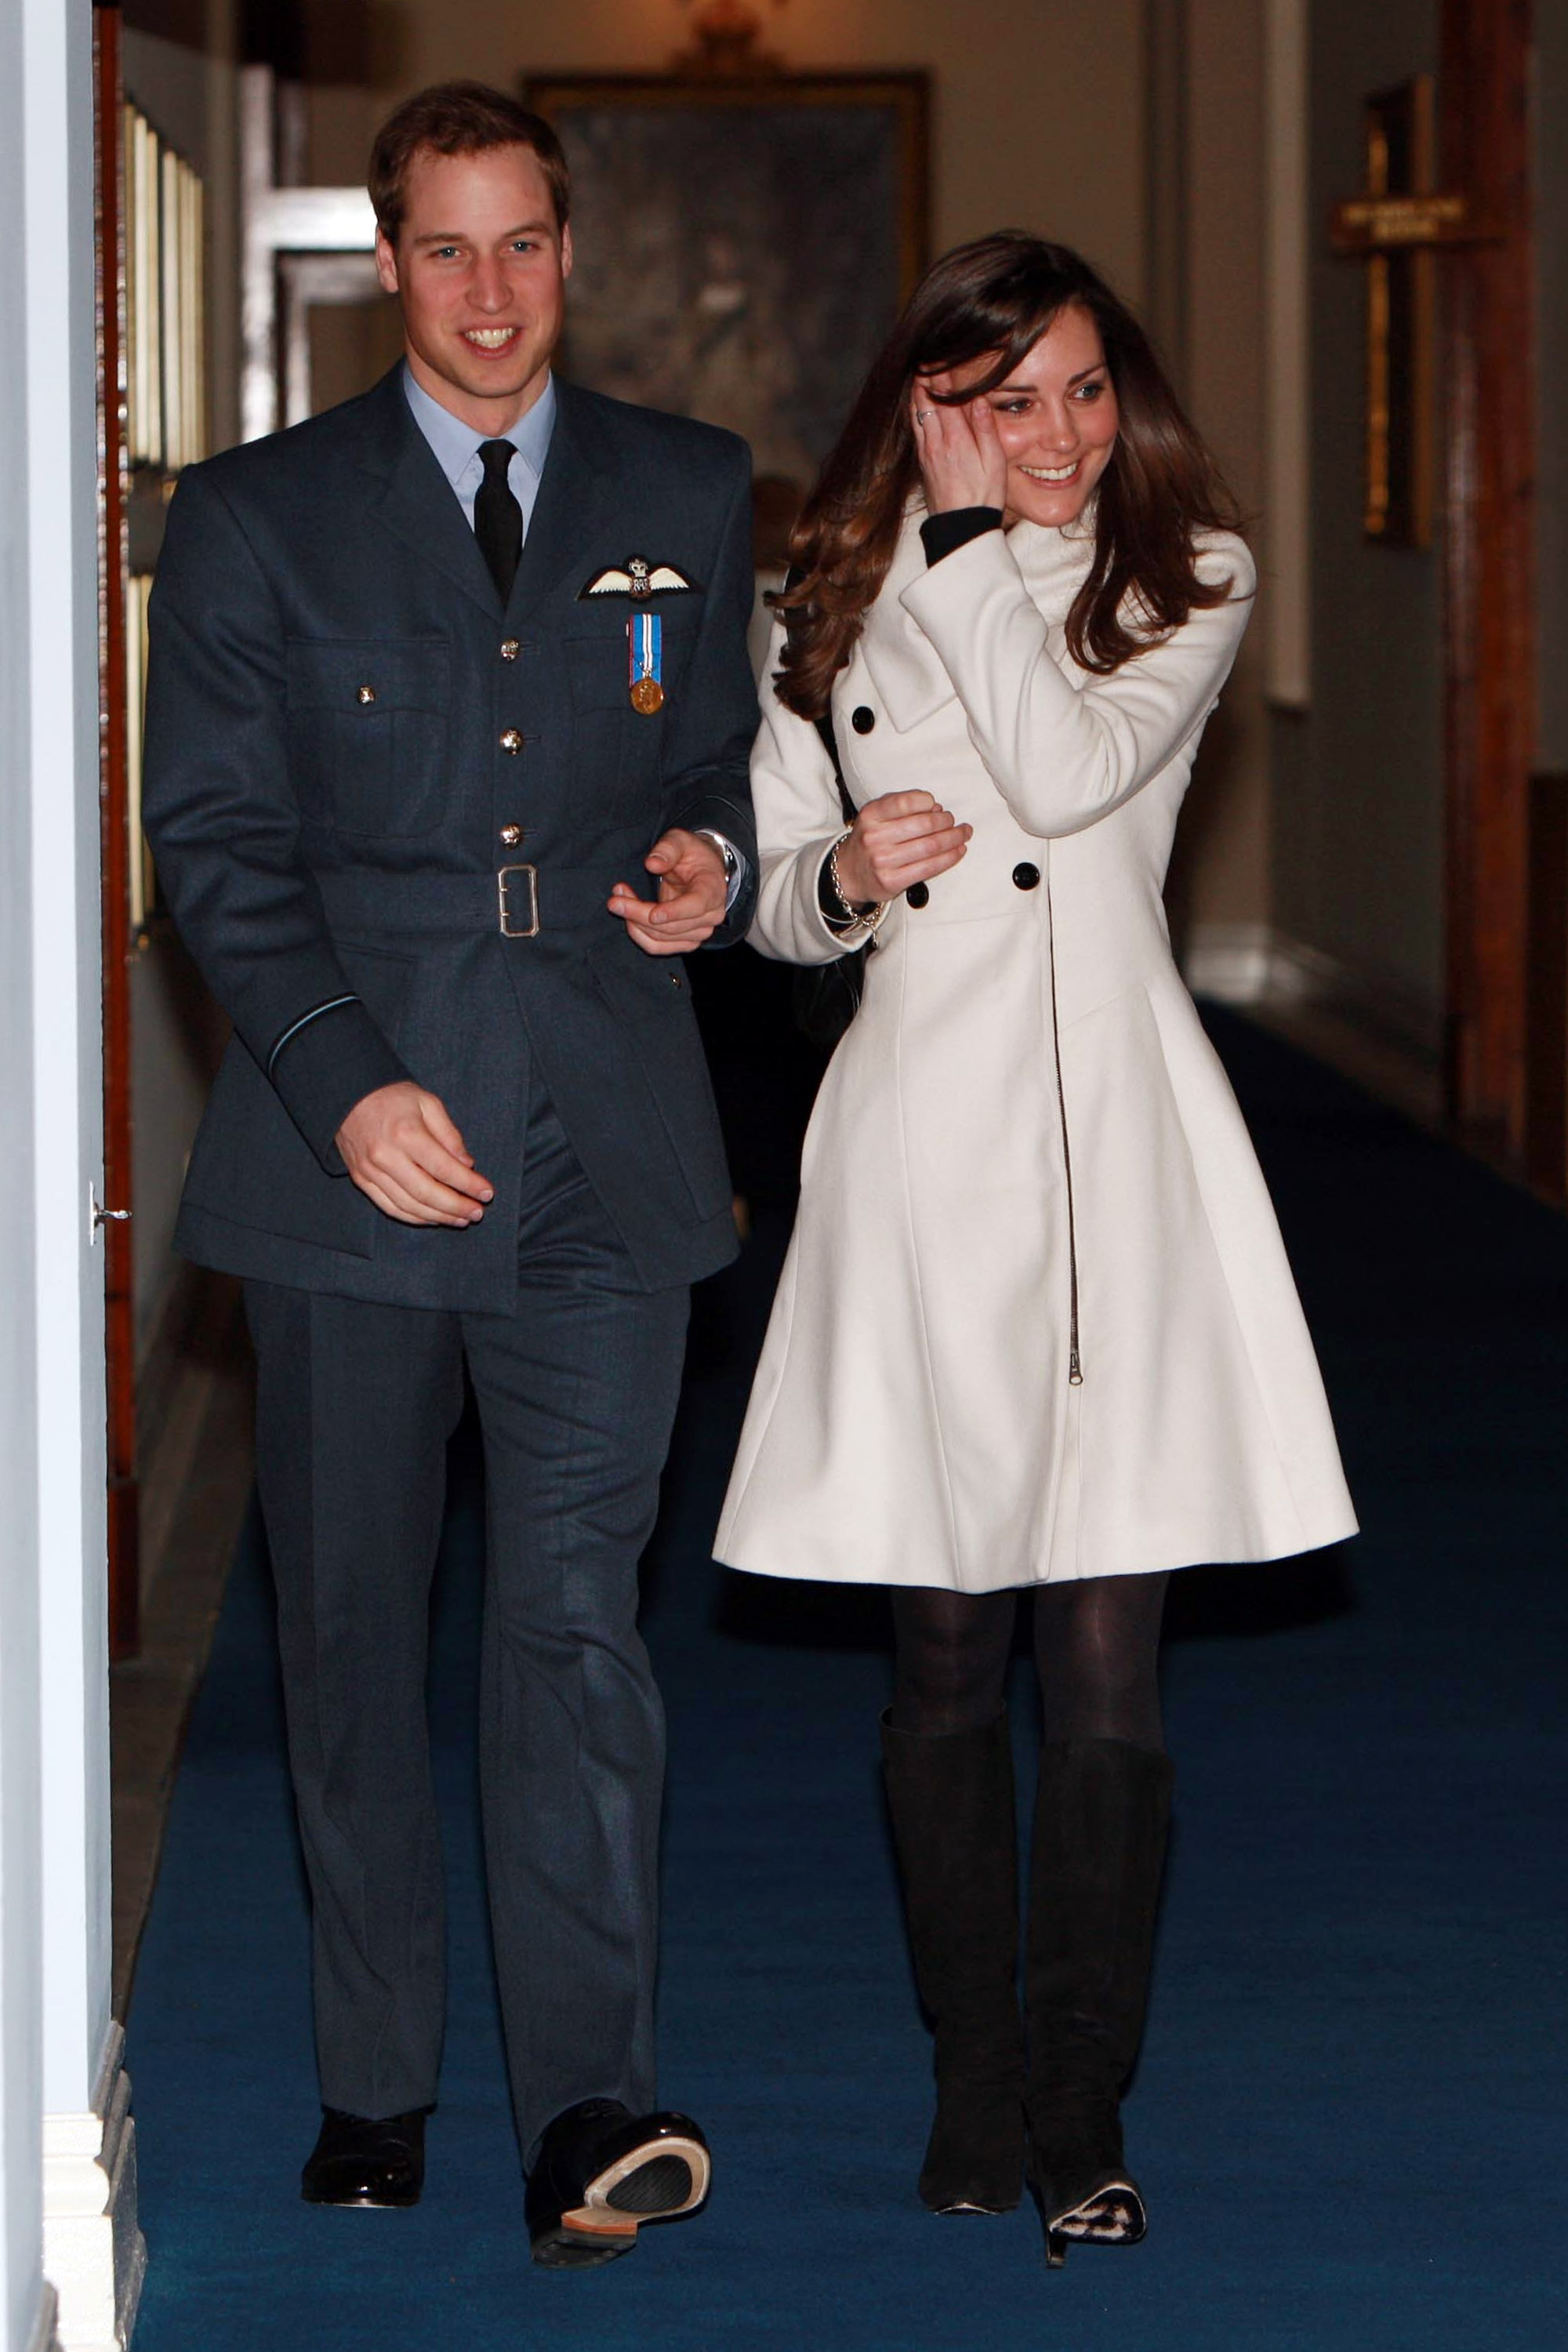 Prince William and Kate Middleton at RAF Cranwell on April 11, 2008, in Cranwell, England. | Source: Getty Images